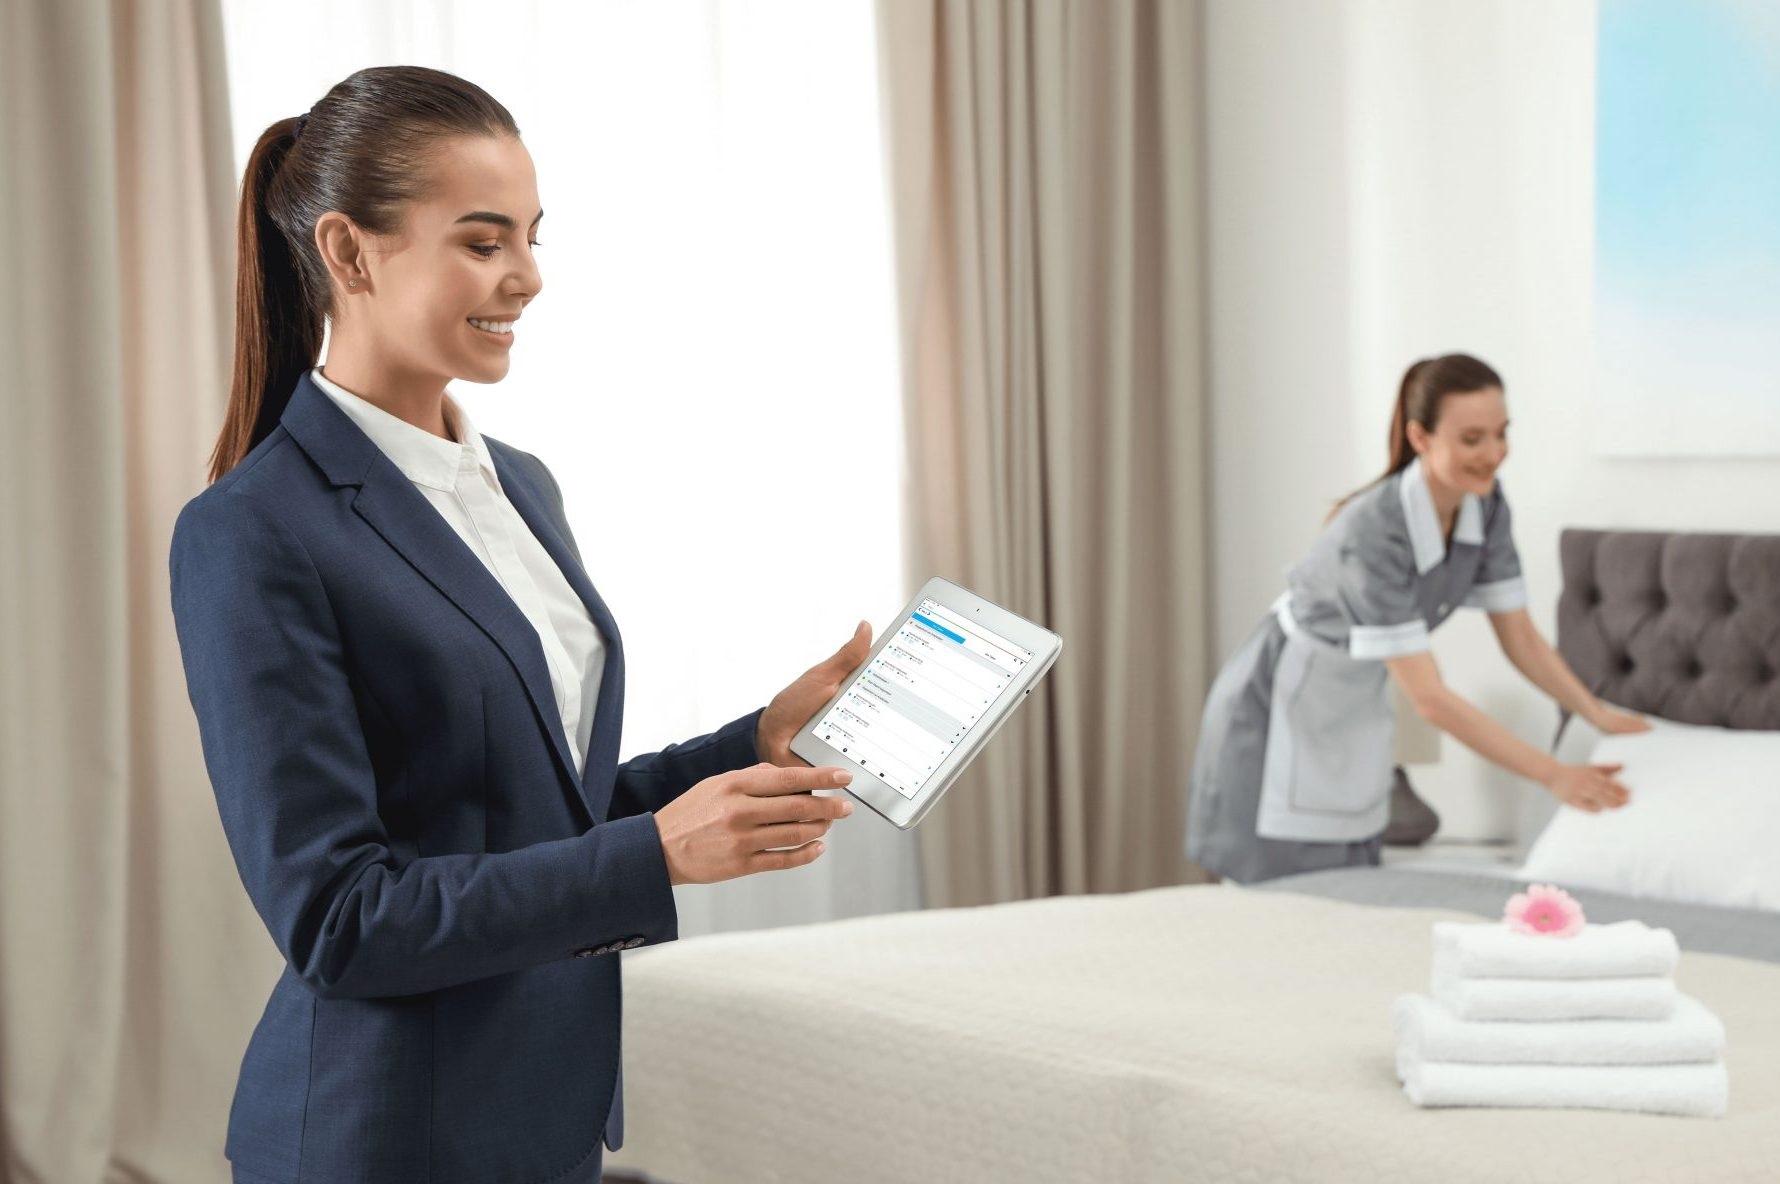 Ensure Timely and Accurate Room Assignments